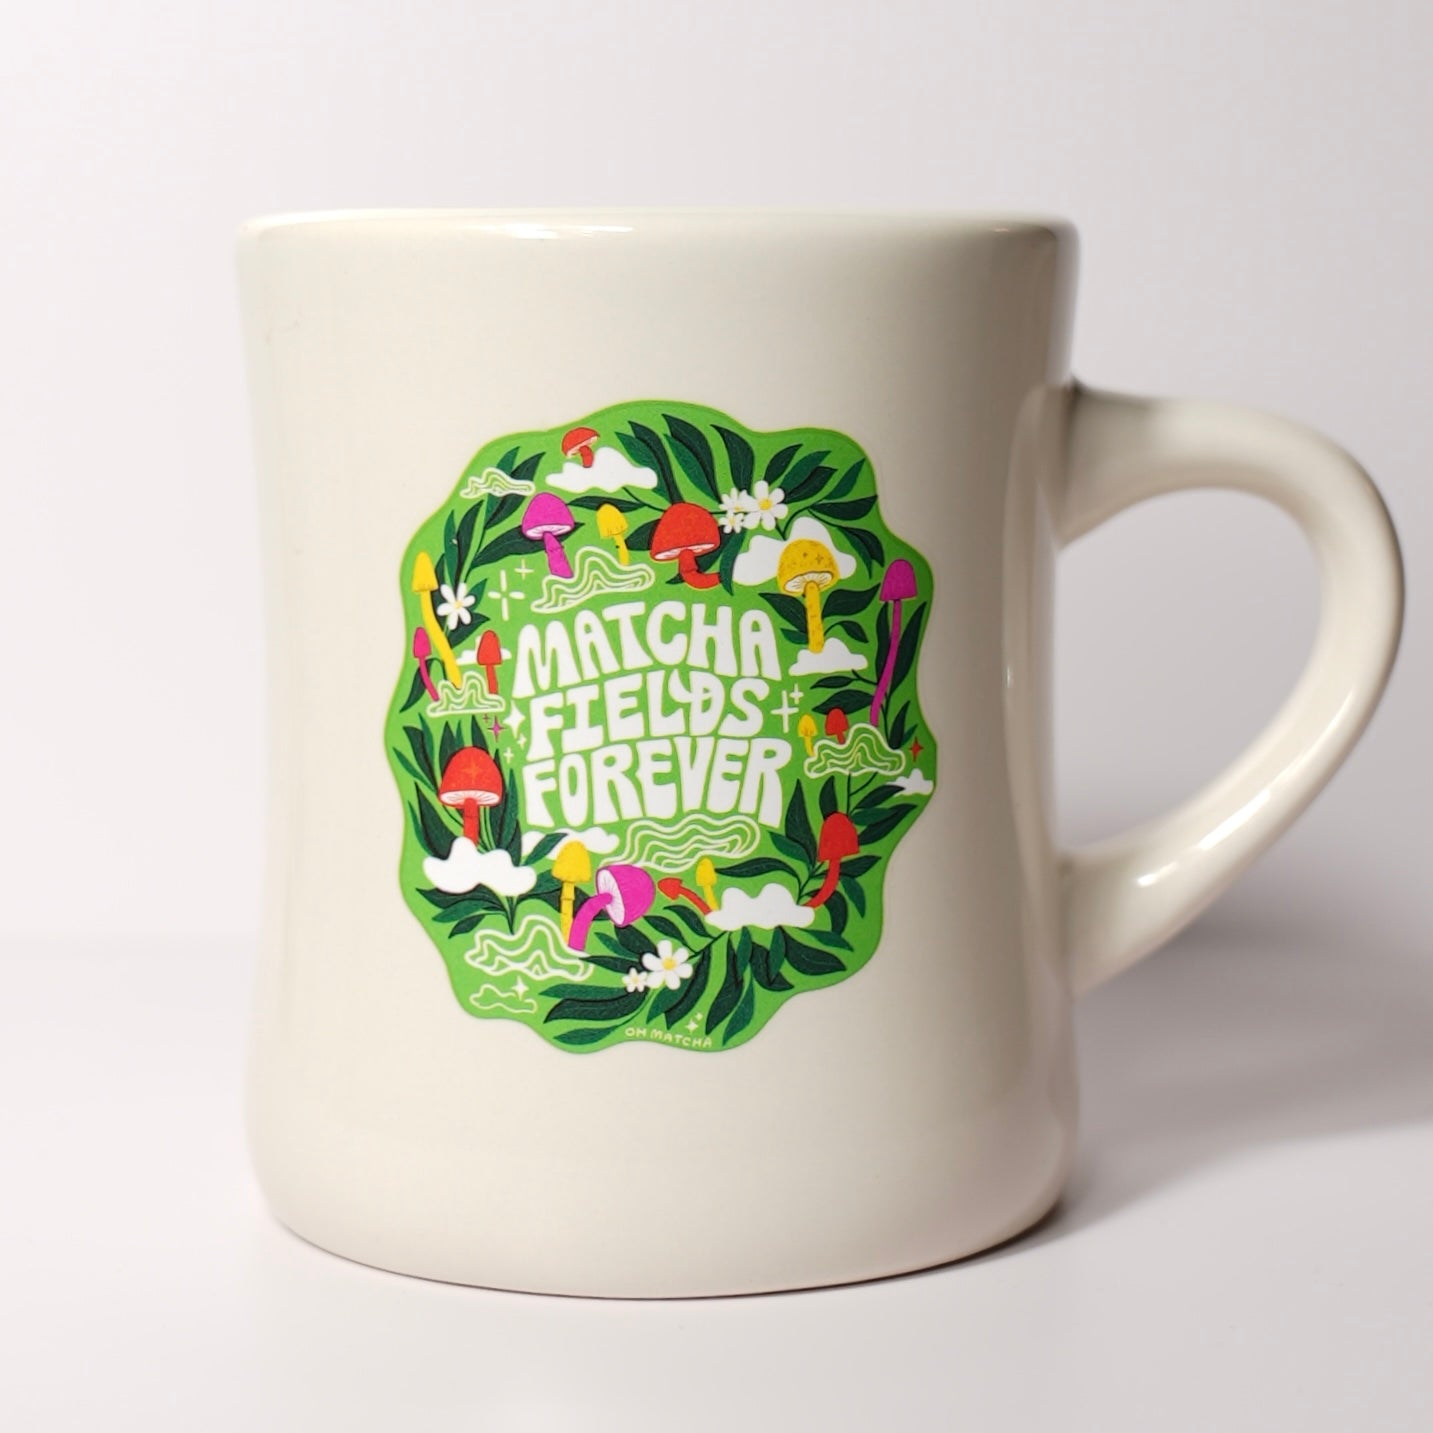 Matcha Green Tea Mugs for Couples, I Love You So Much Coffee Cup